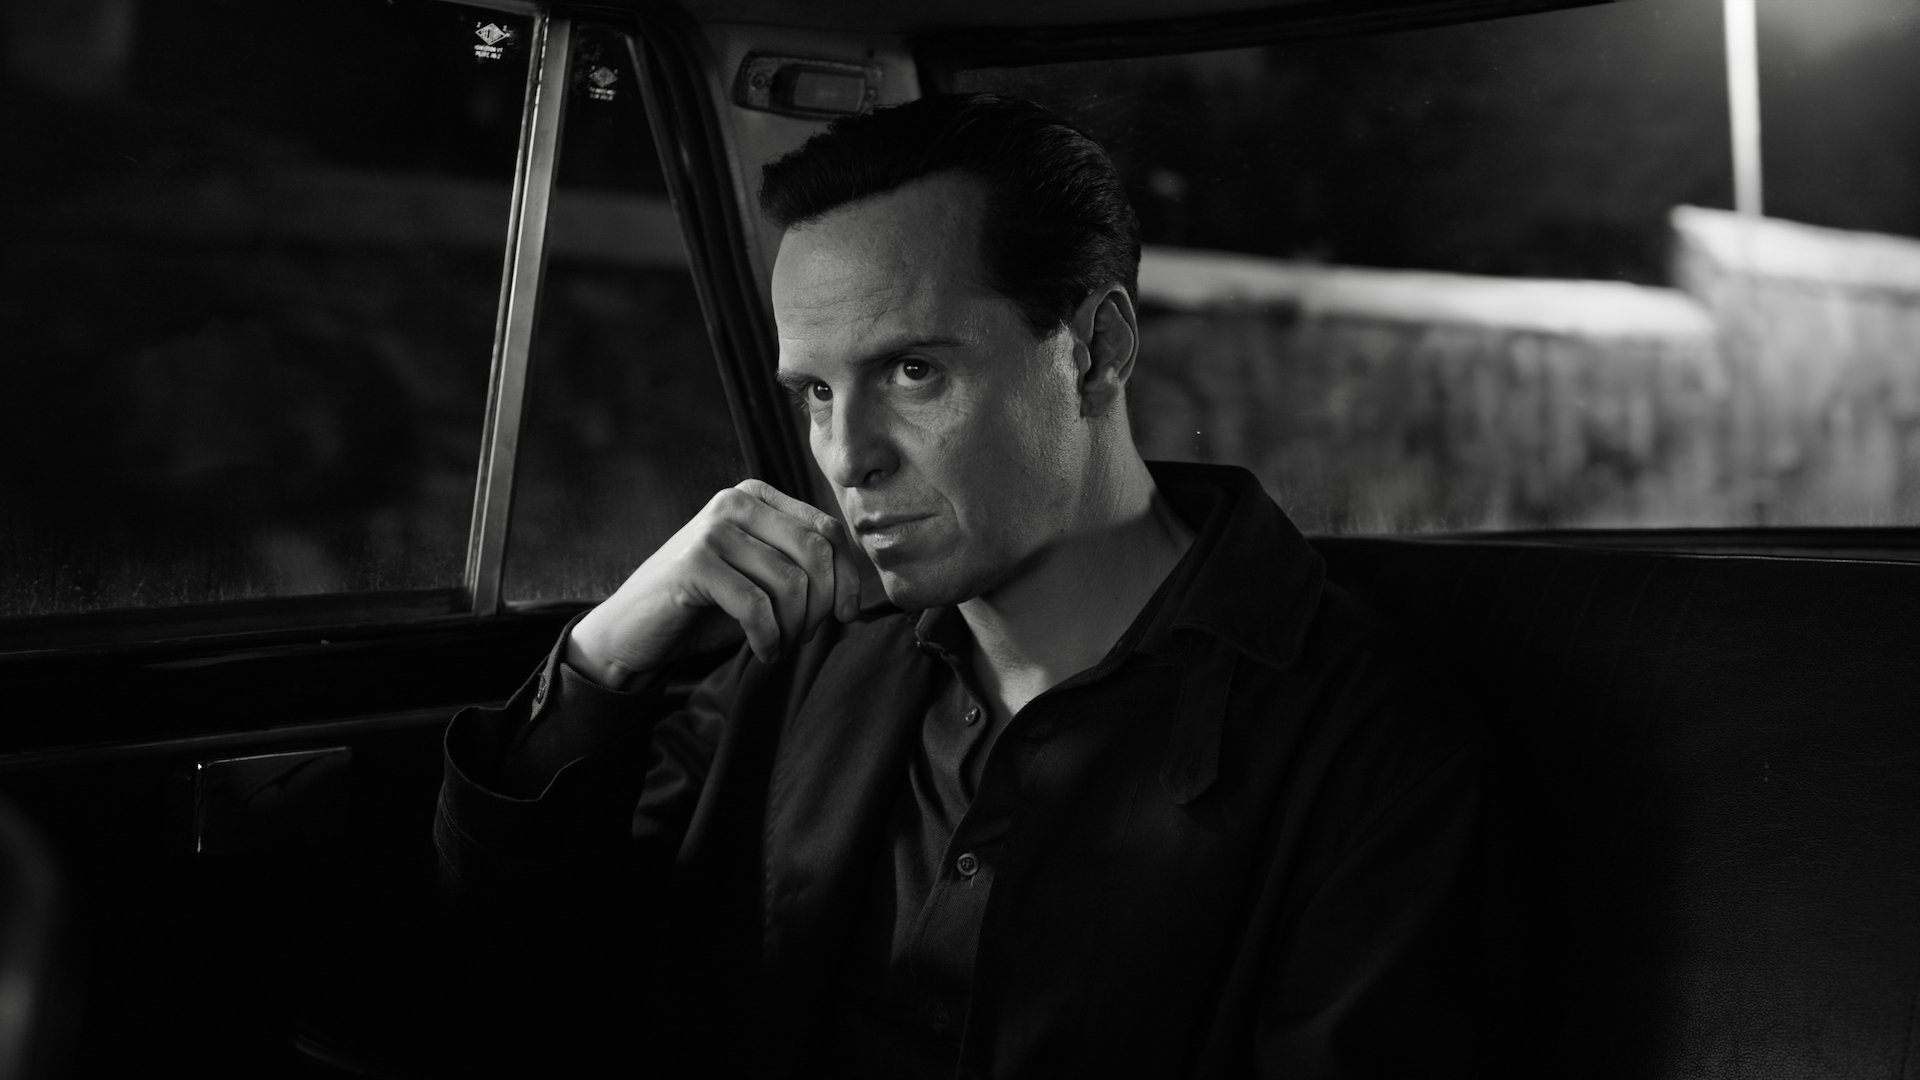 A man sits in a dark taxi looking intense.